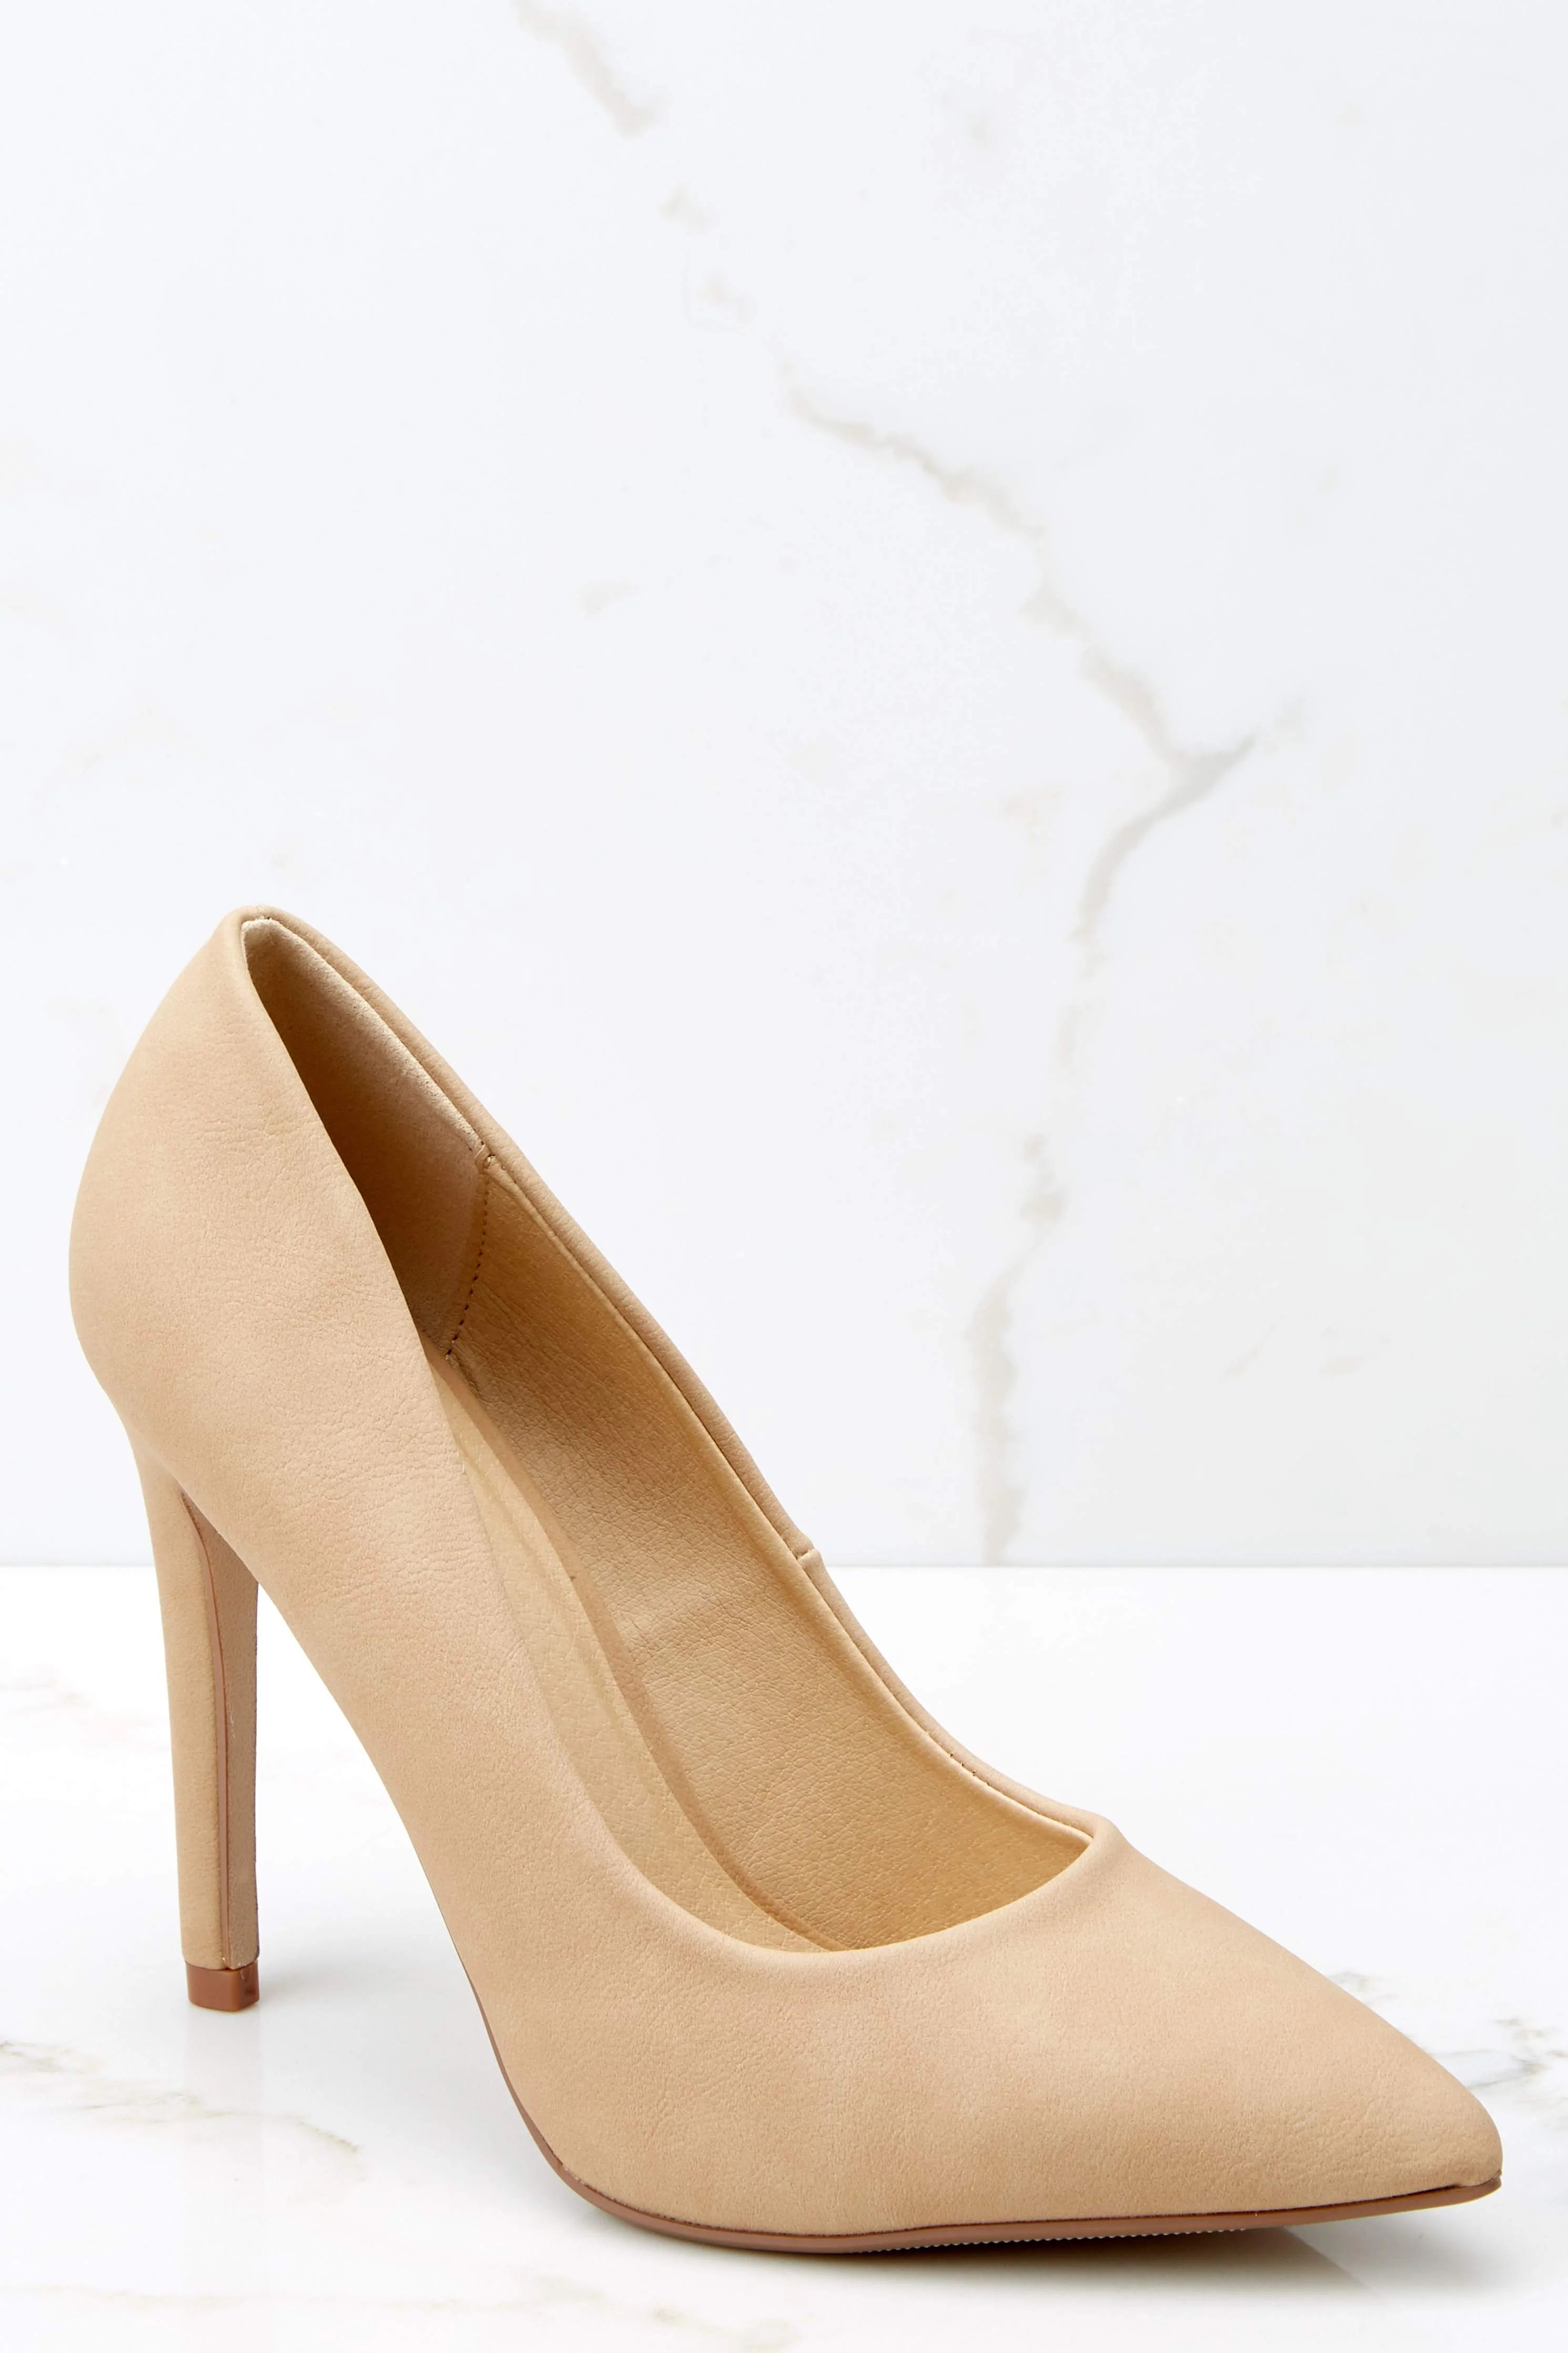 Picture Perfect Natural Pointed Pumps | Red Dress 